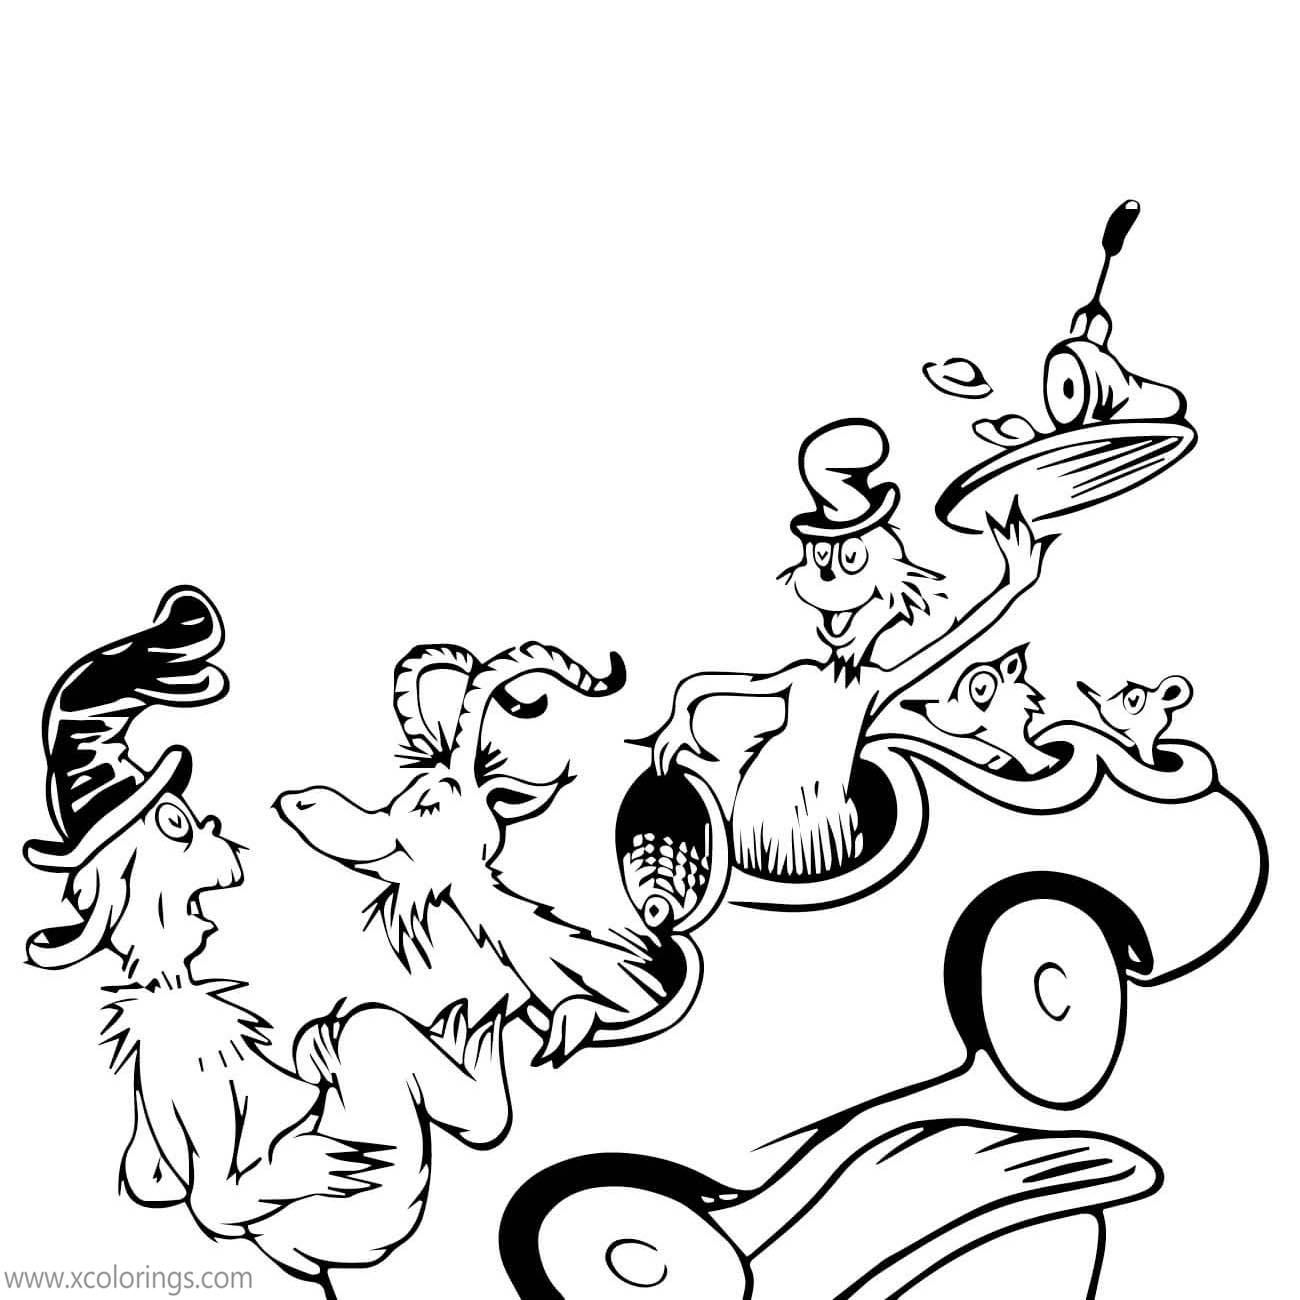 Green Eggs and Ham Coloring Pages Characters On the Car - XColorings.com